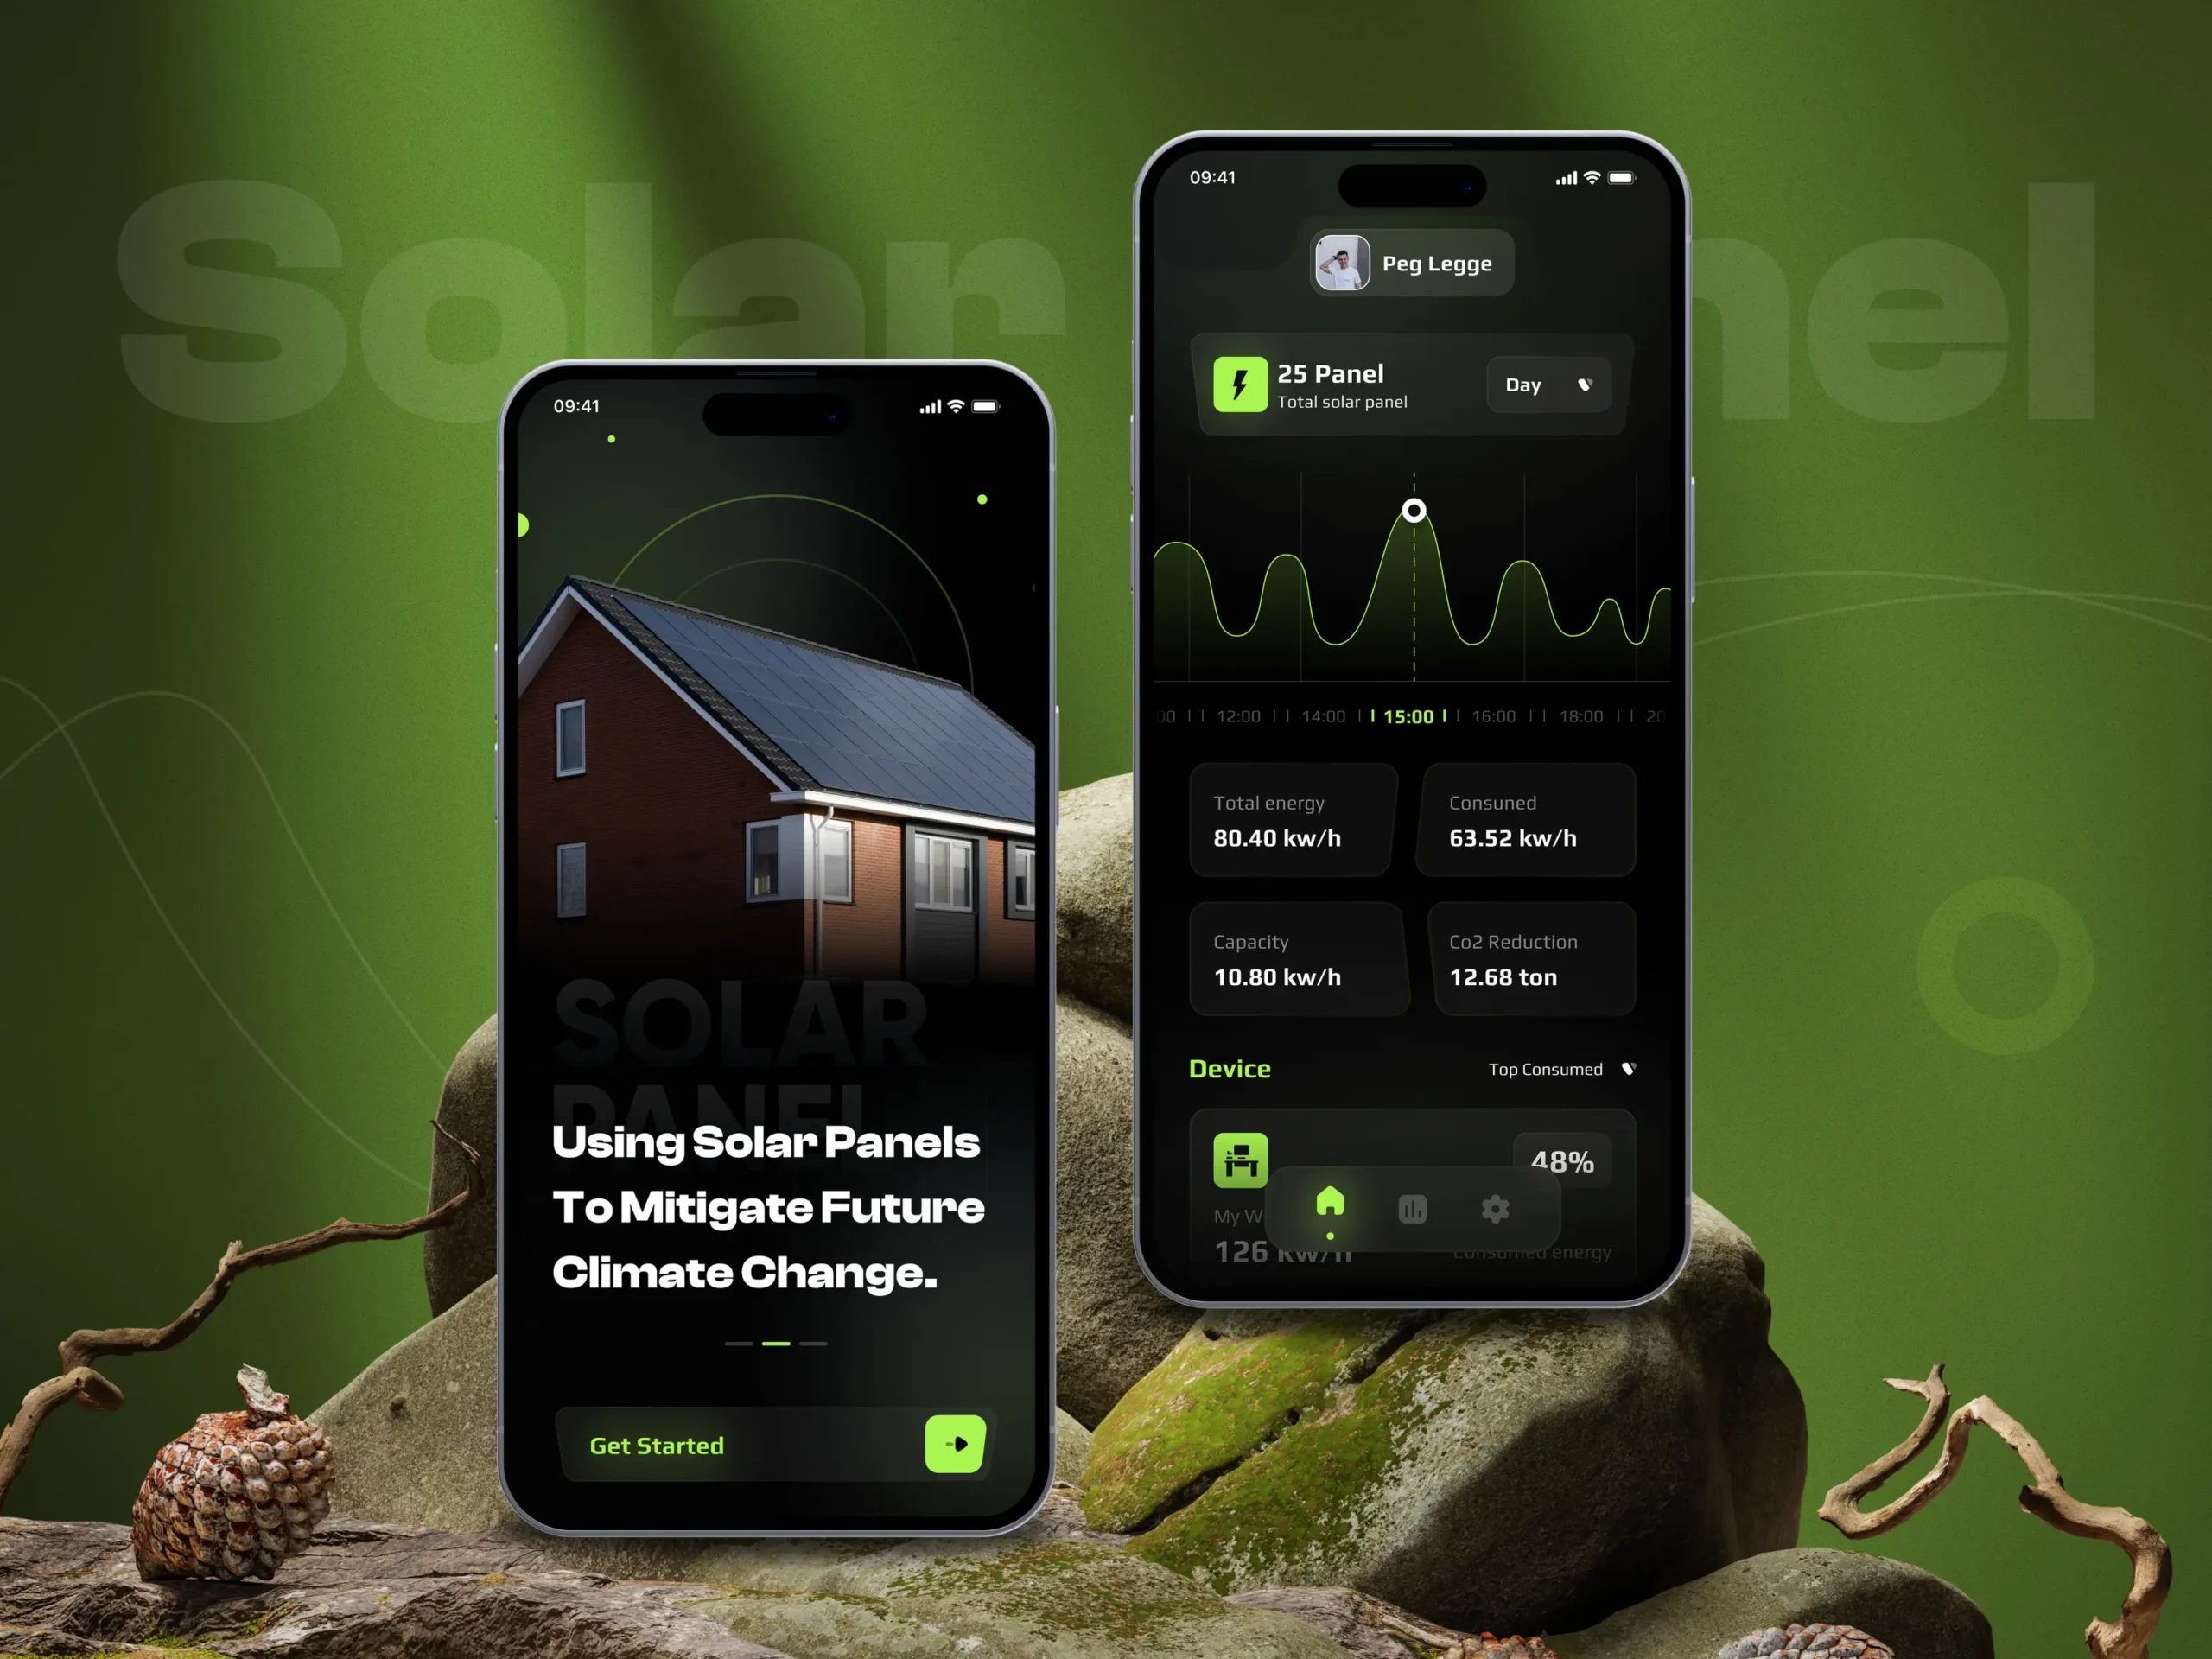 app phone interface controlling solar panels - Which Solarman app to use